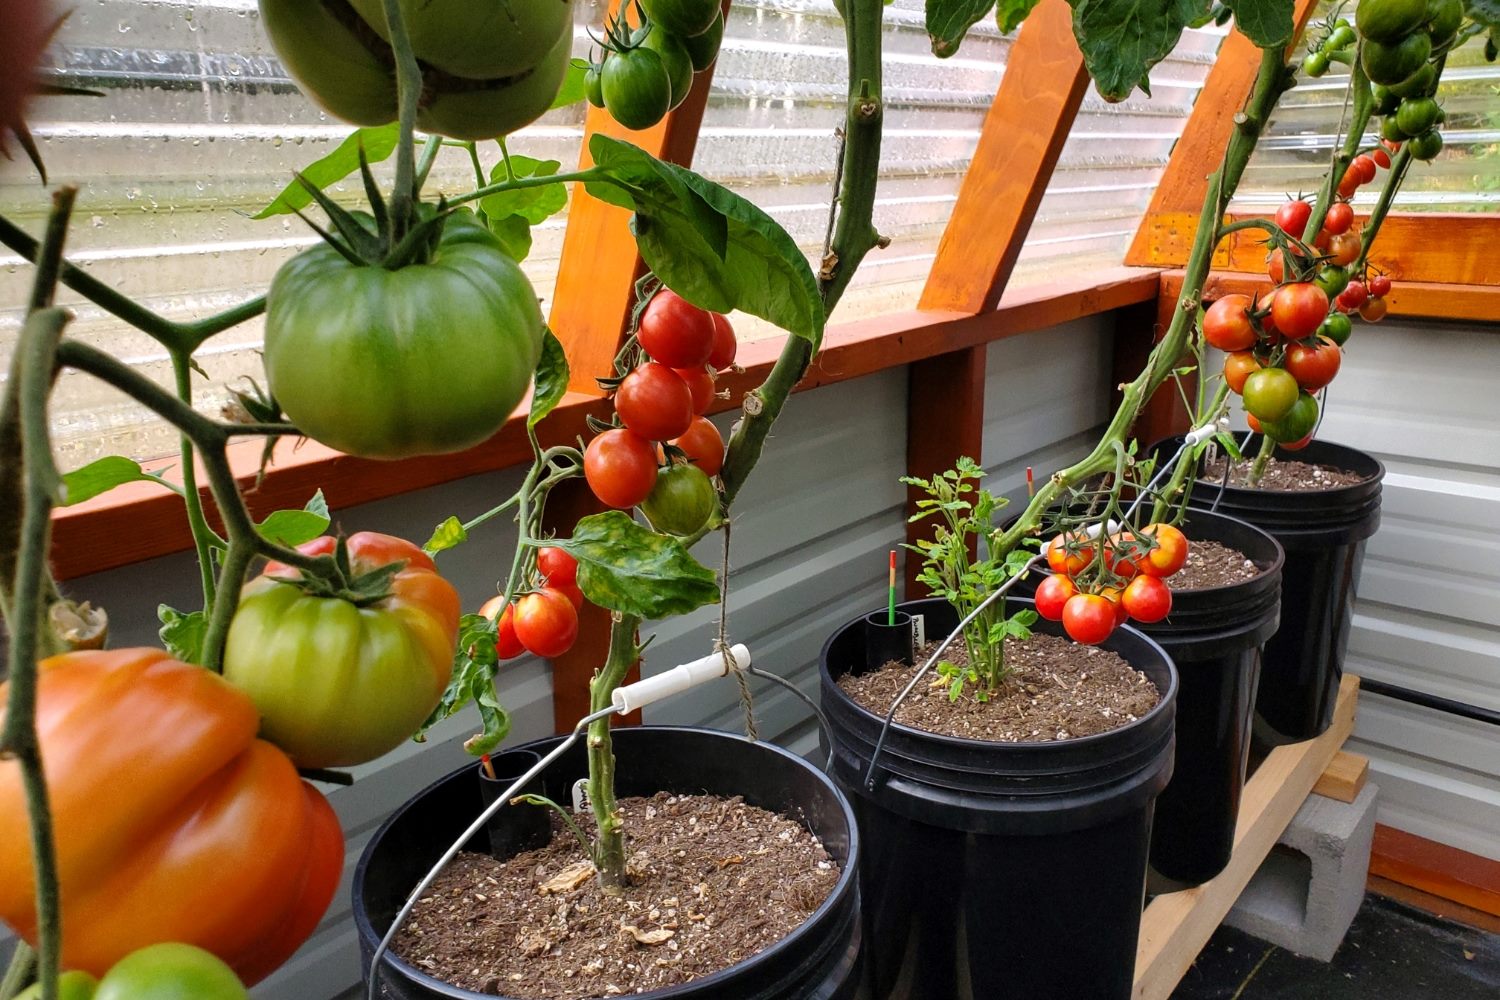 The Surprising Secret To Growing Tomatoes Revealed!